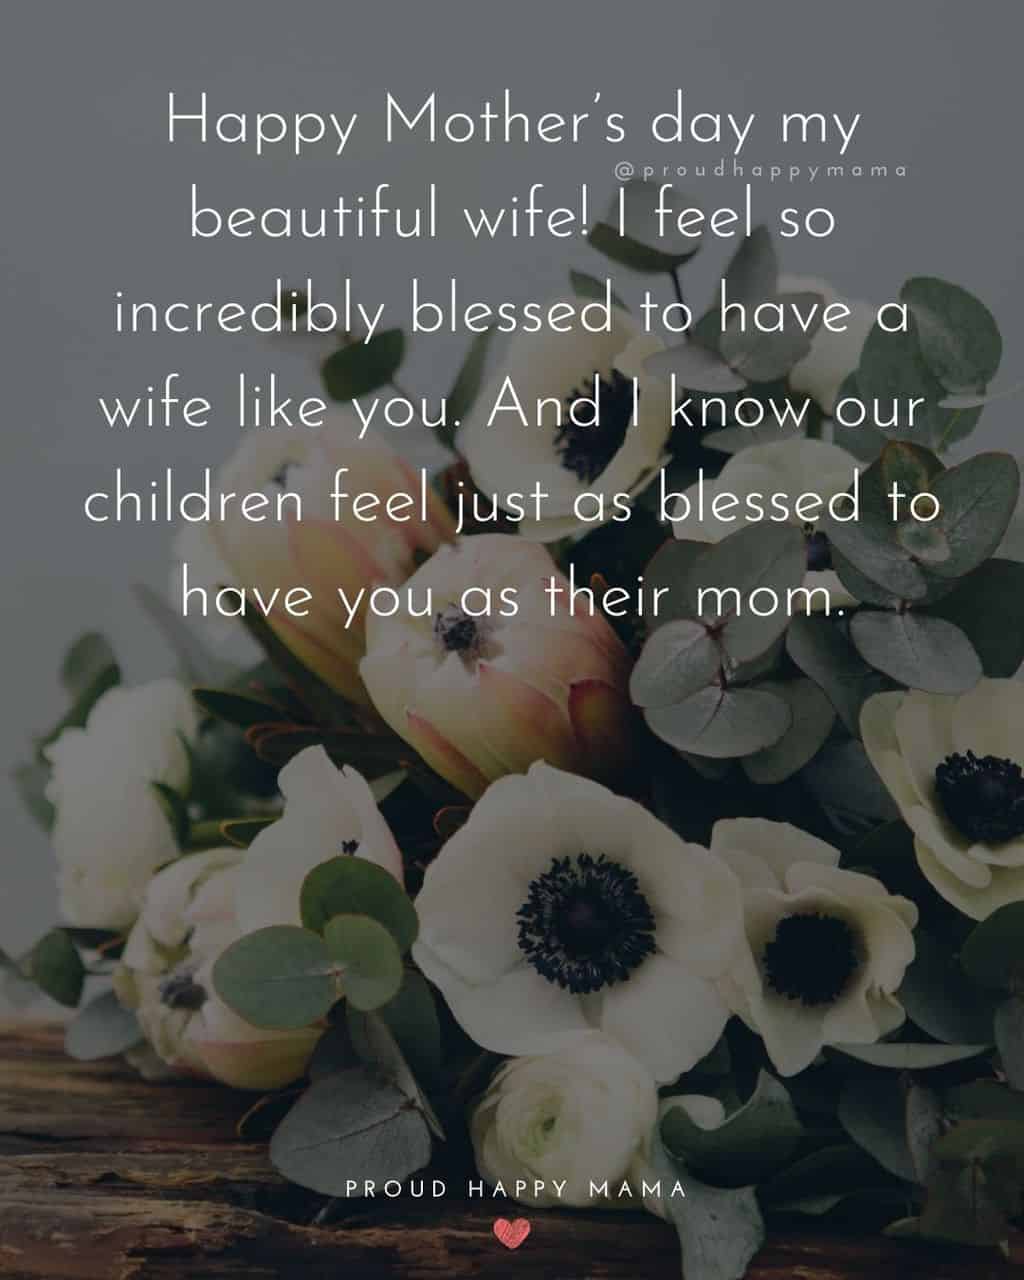 Happy Mothers Day Quotes For Wife - Happy Mother’s day my beautiful wife! I feel so incredibly blessed to have a wife like you.